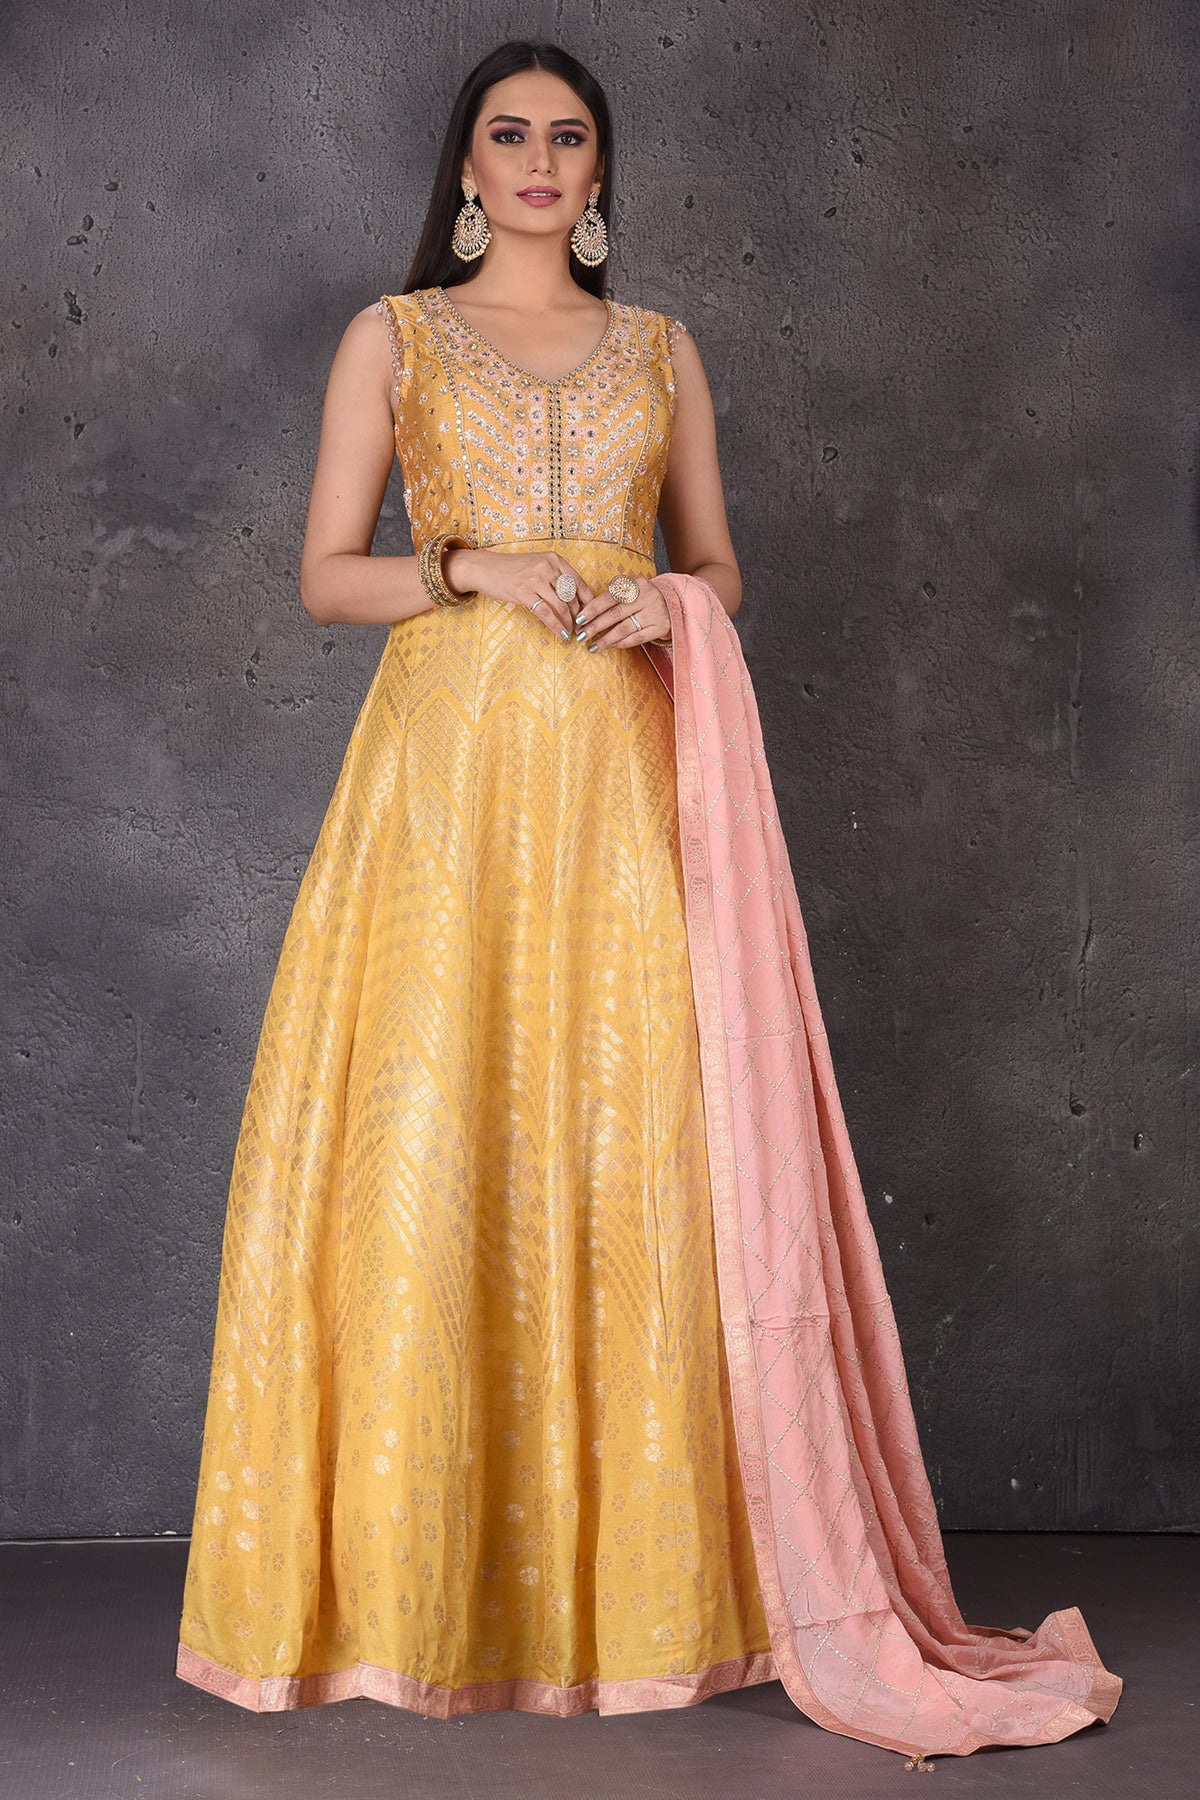 Buy stunning yellow embroidered  Anarkali suit online in USA with pink dupatta. Look elegant at weddings and festive occasions in exclusive designer suits, designer gowns, Anarkali suits, sharara suits, wedding gowns, palazzo suits, designer lehenga from Pure Elegance Indian clothing store in USA.-full view